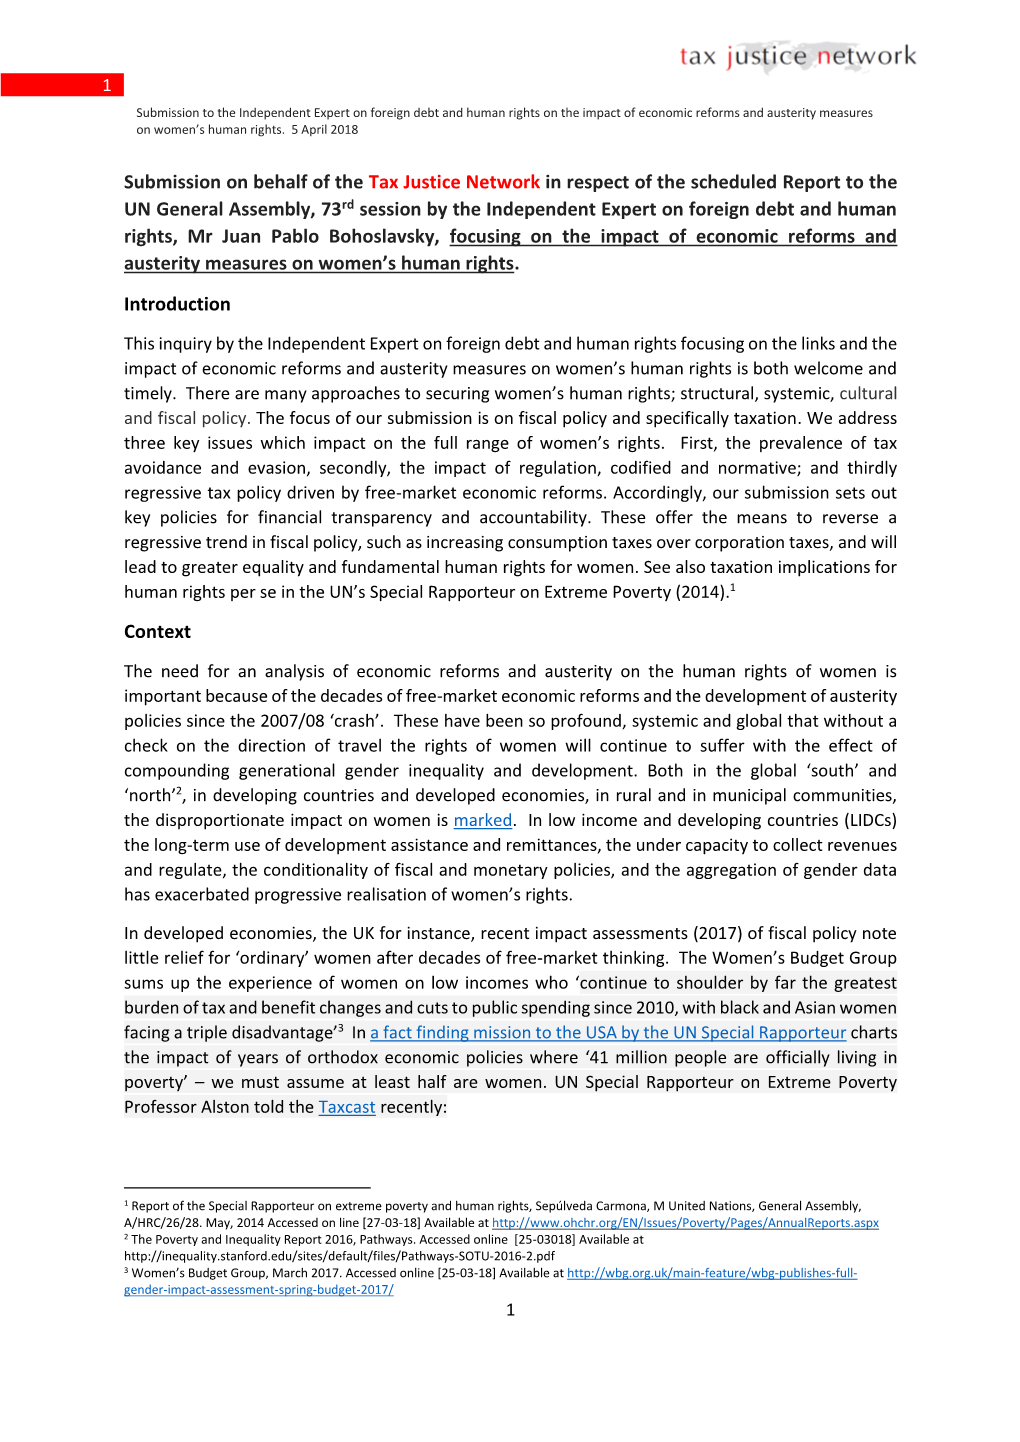 Submission to the Independent Expert on Foreign Debt and Human Rights on the Impact of Economic Reforms and Austerity Measures on Women’S Human Rights